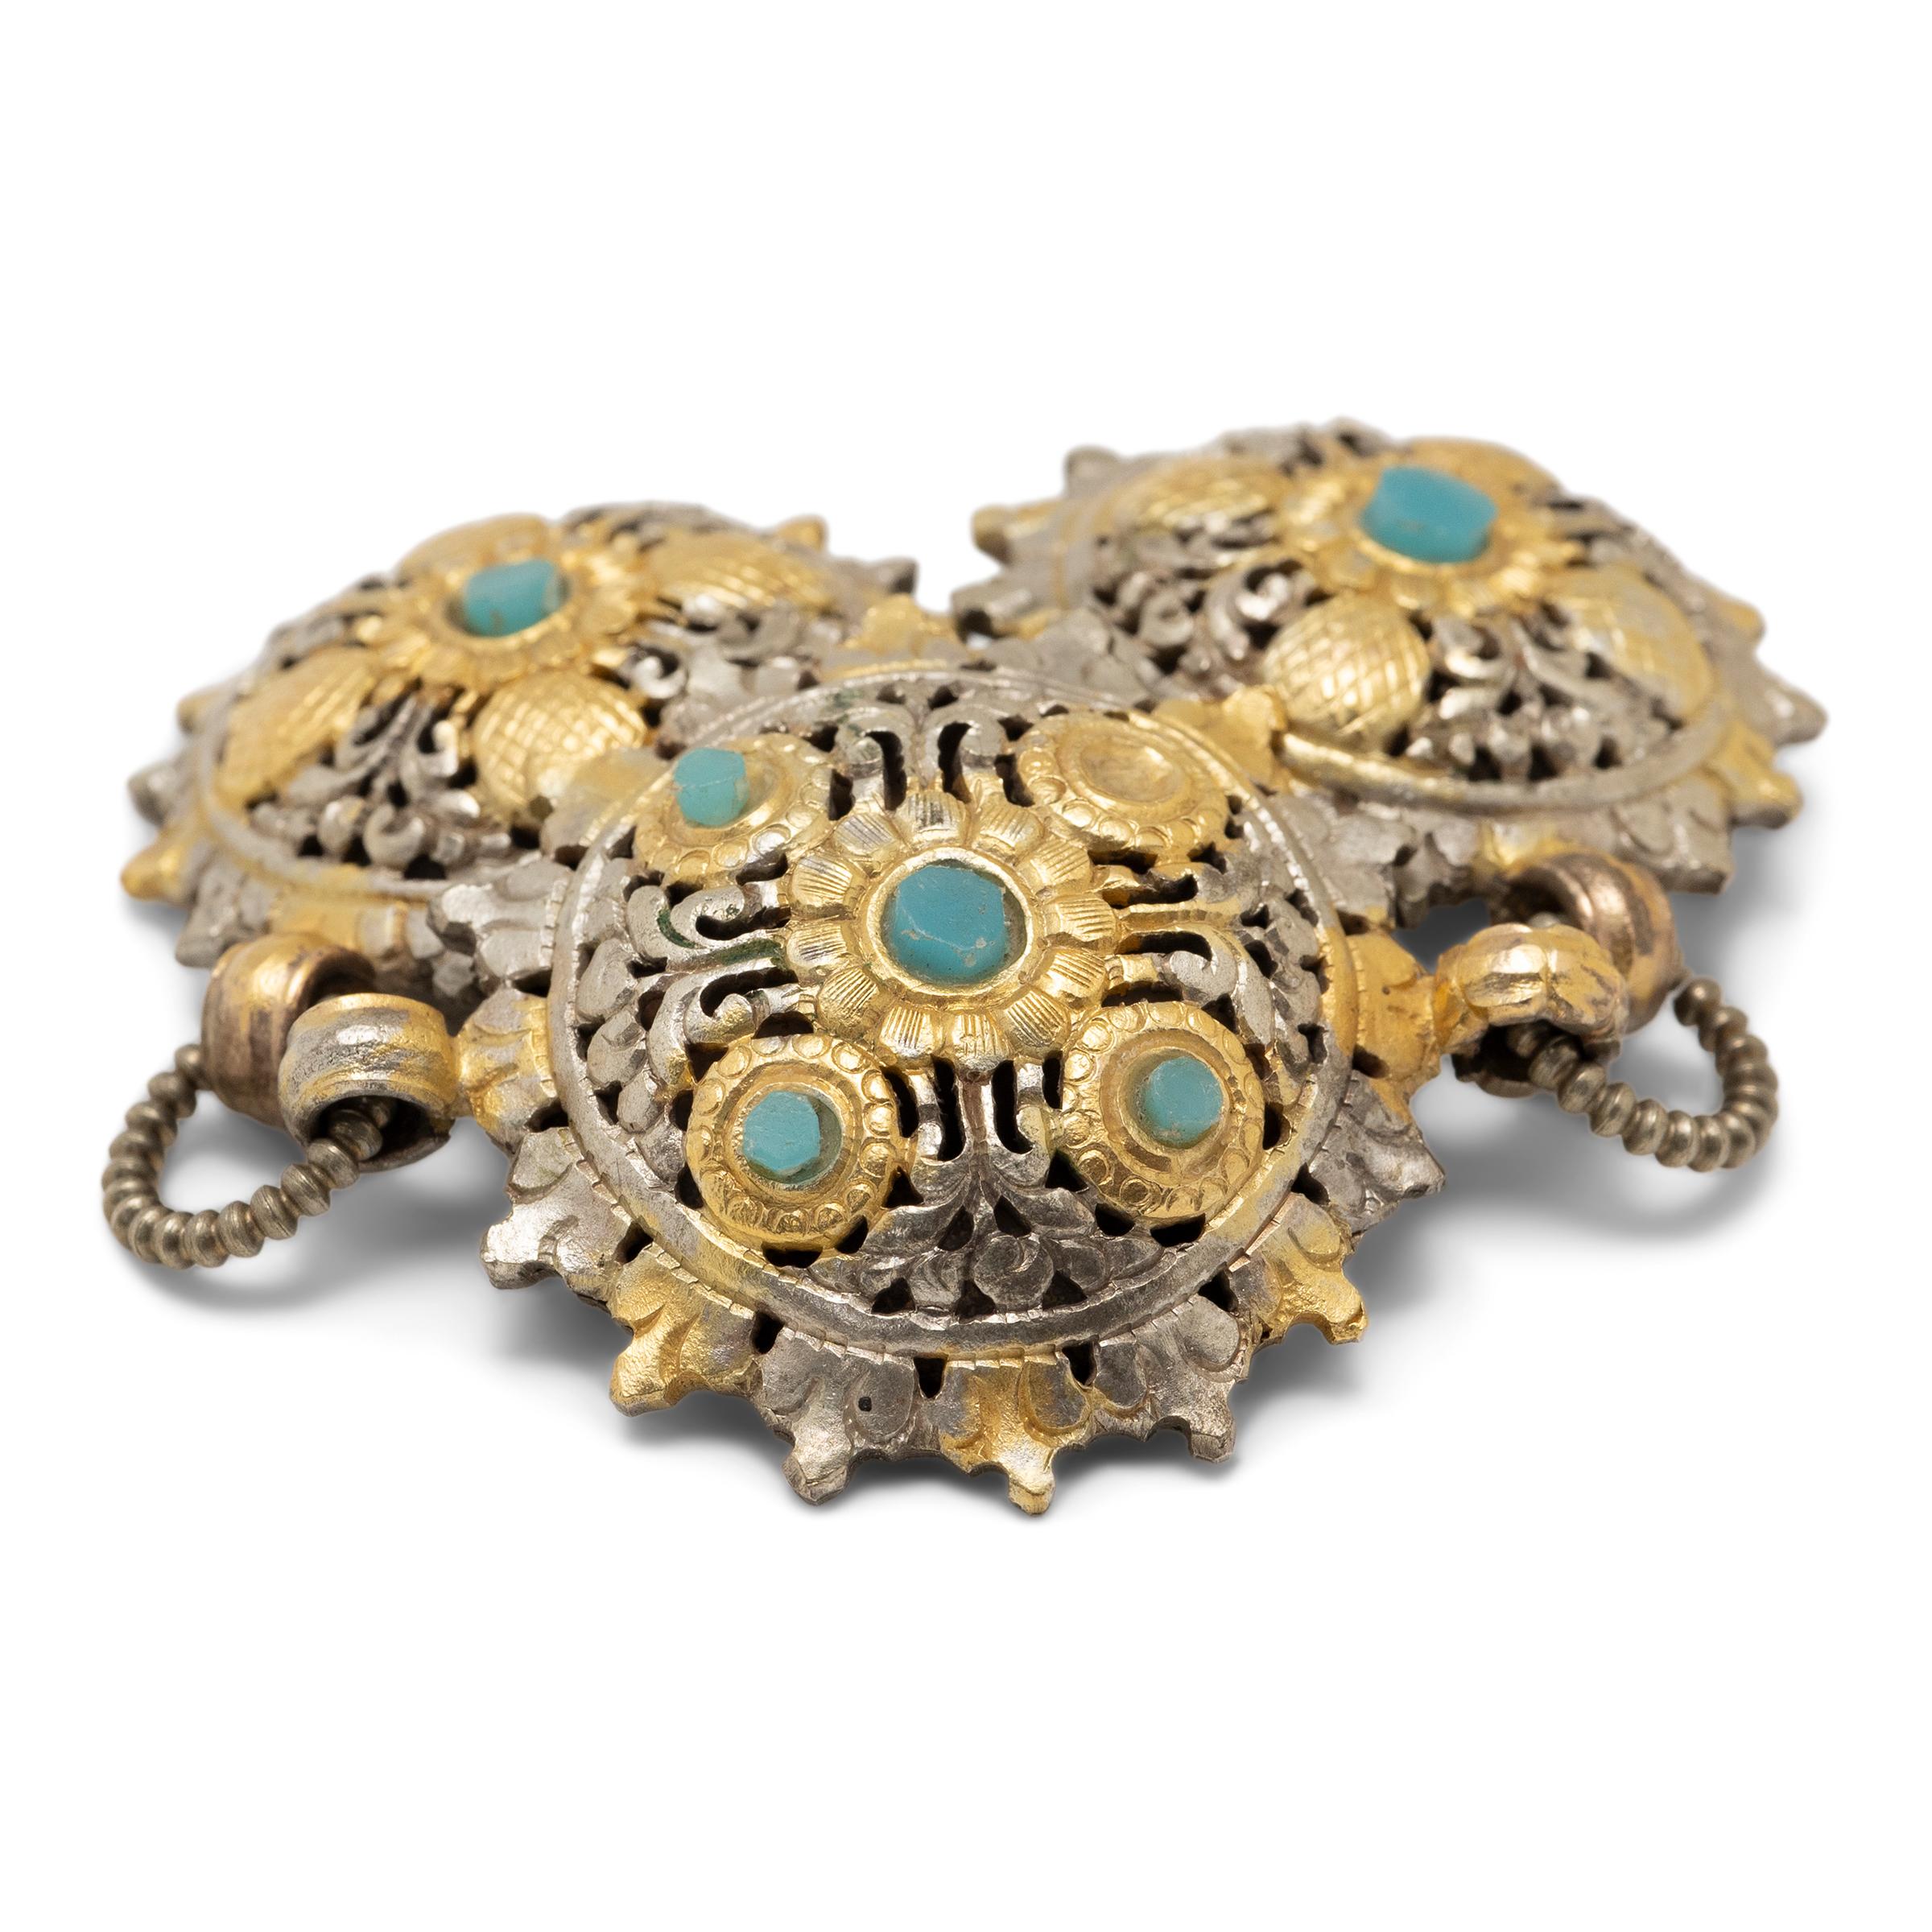 These openwork cast alloy brooches are a contemporary example of Bhutanese cloak fasteners known as koma. Worn by women to secure a traditional garment known as kira, the fasteners were secured to one's clothing by simple hooks affixed to the backs